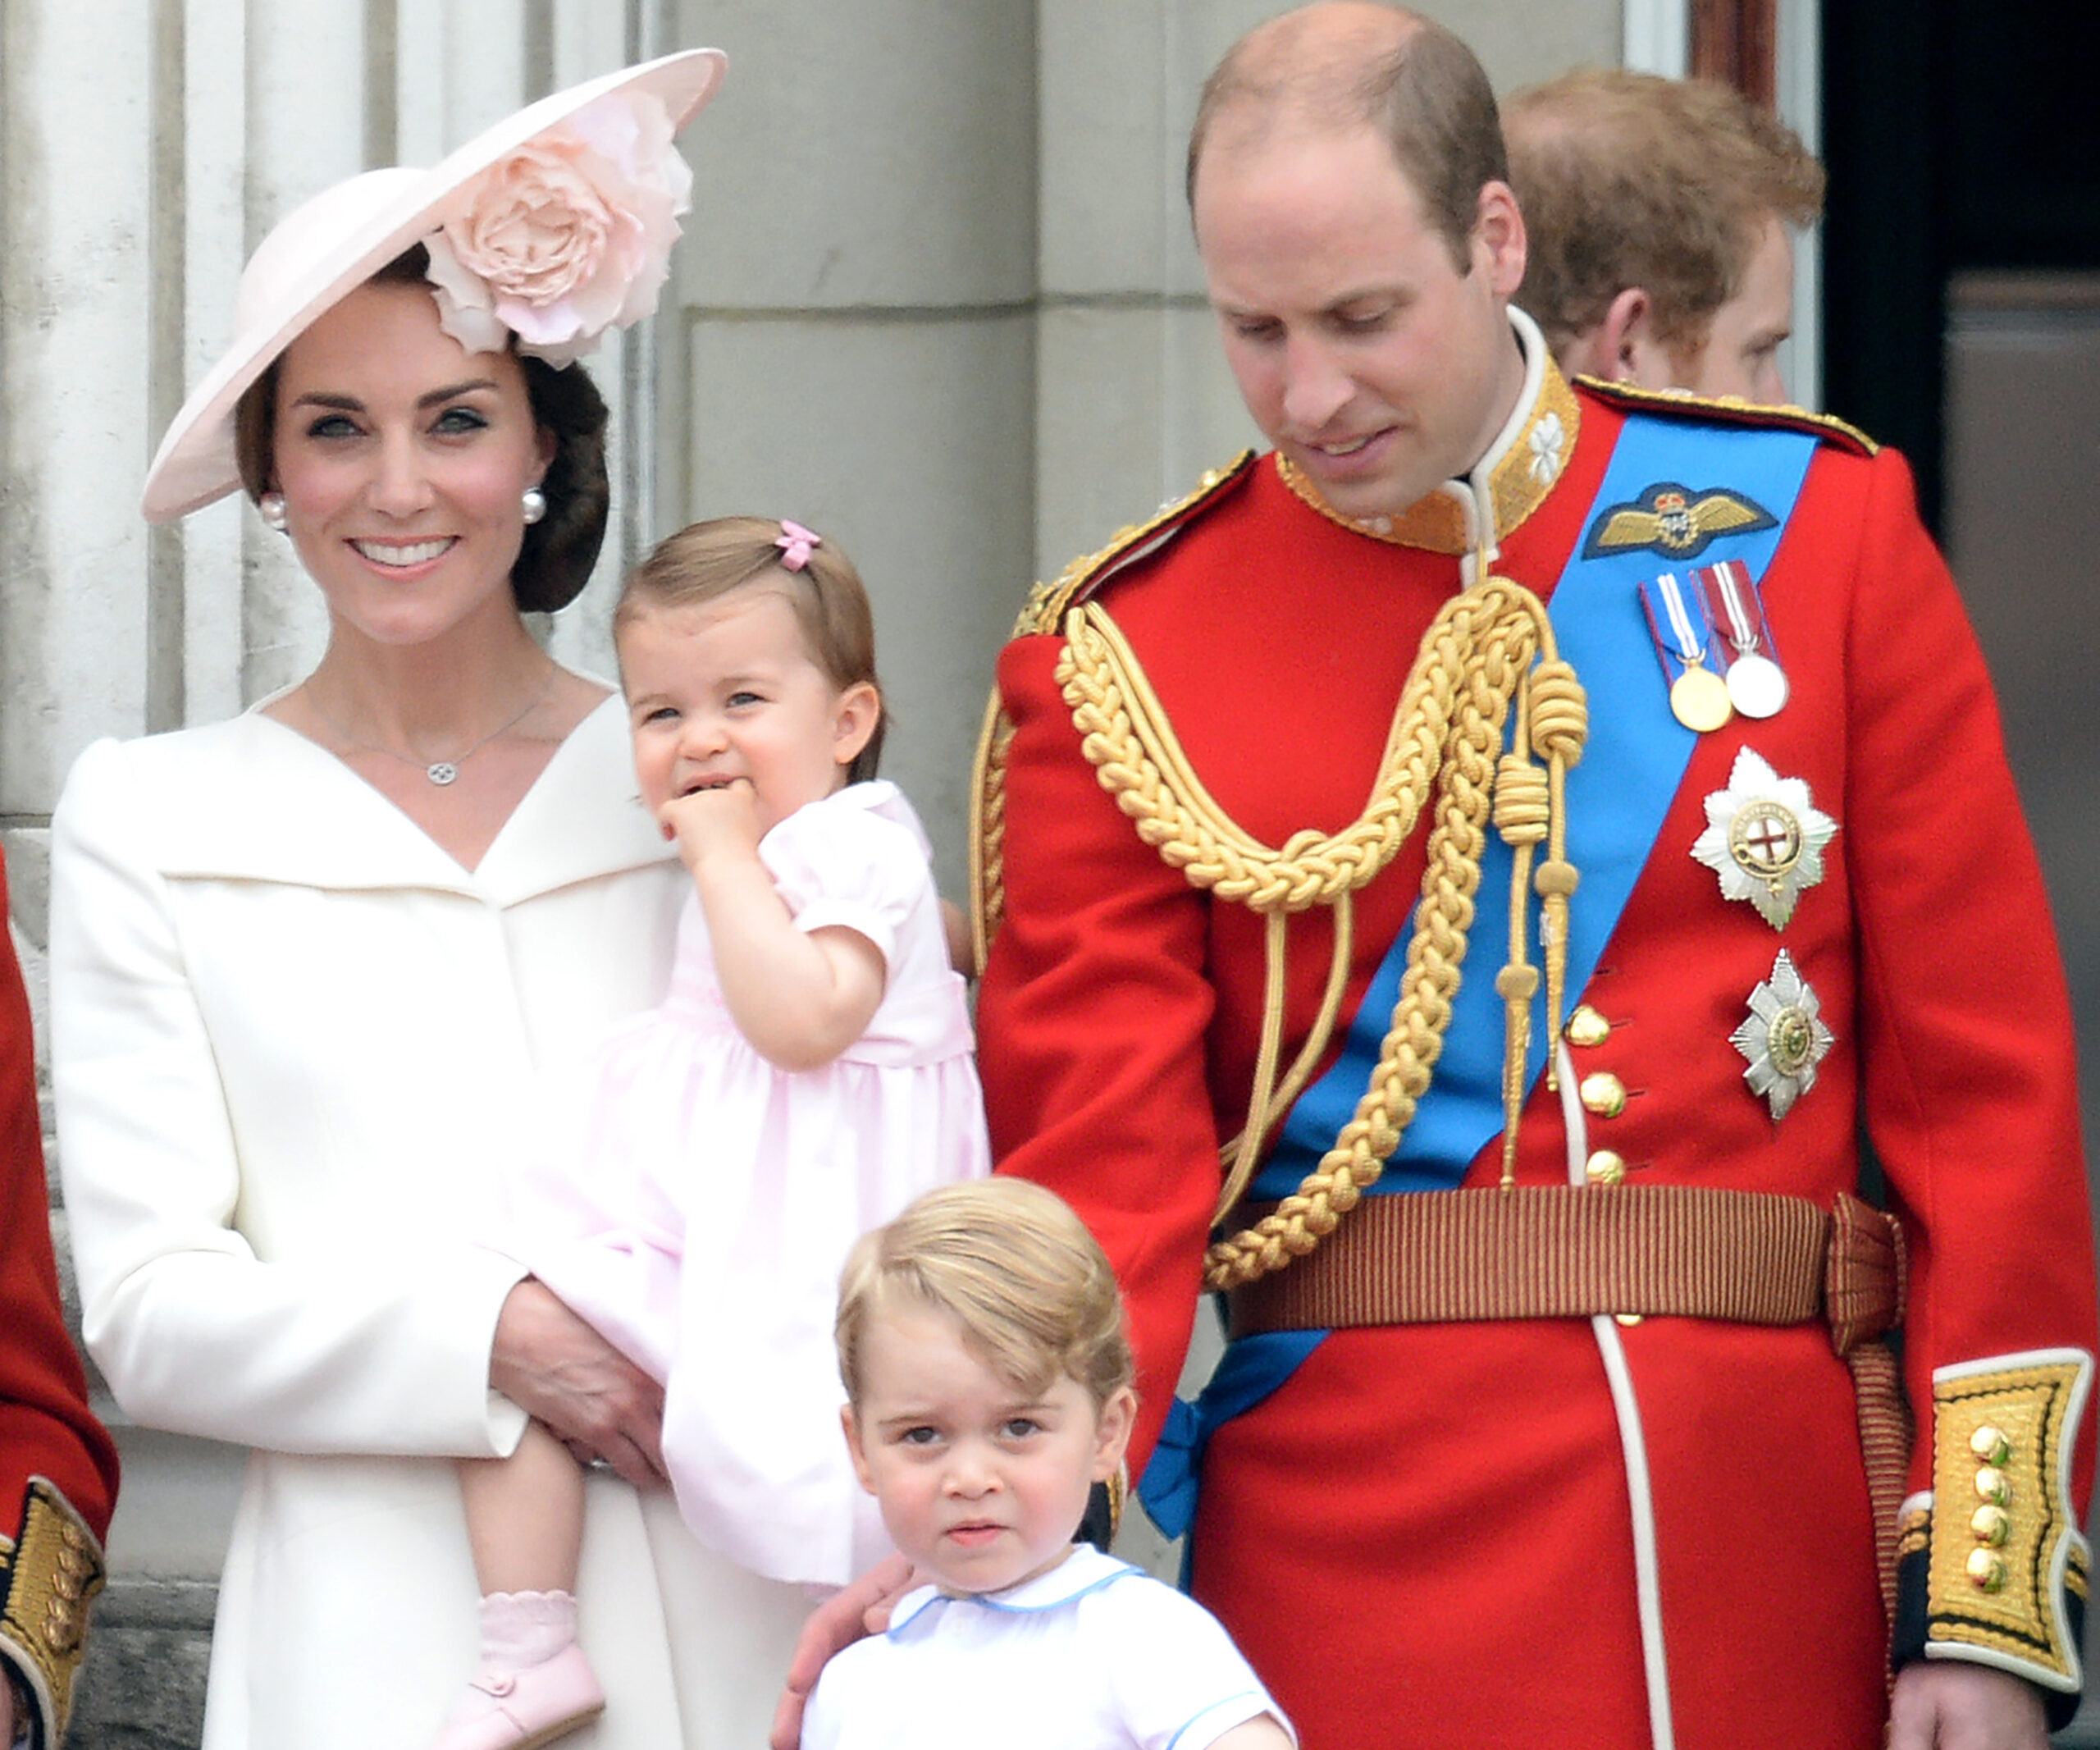 Prince William shares his biggest fears for Prince George and Princess Charlotte